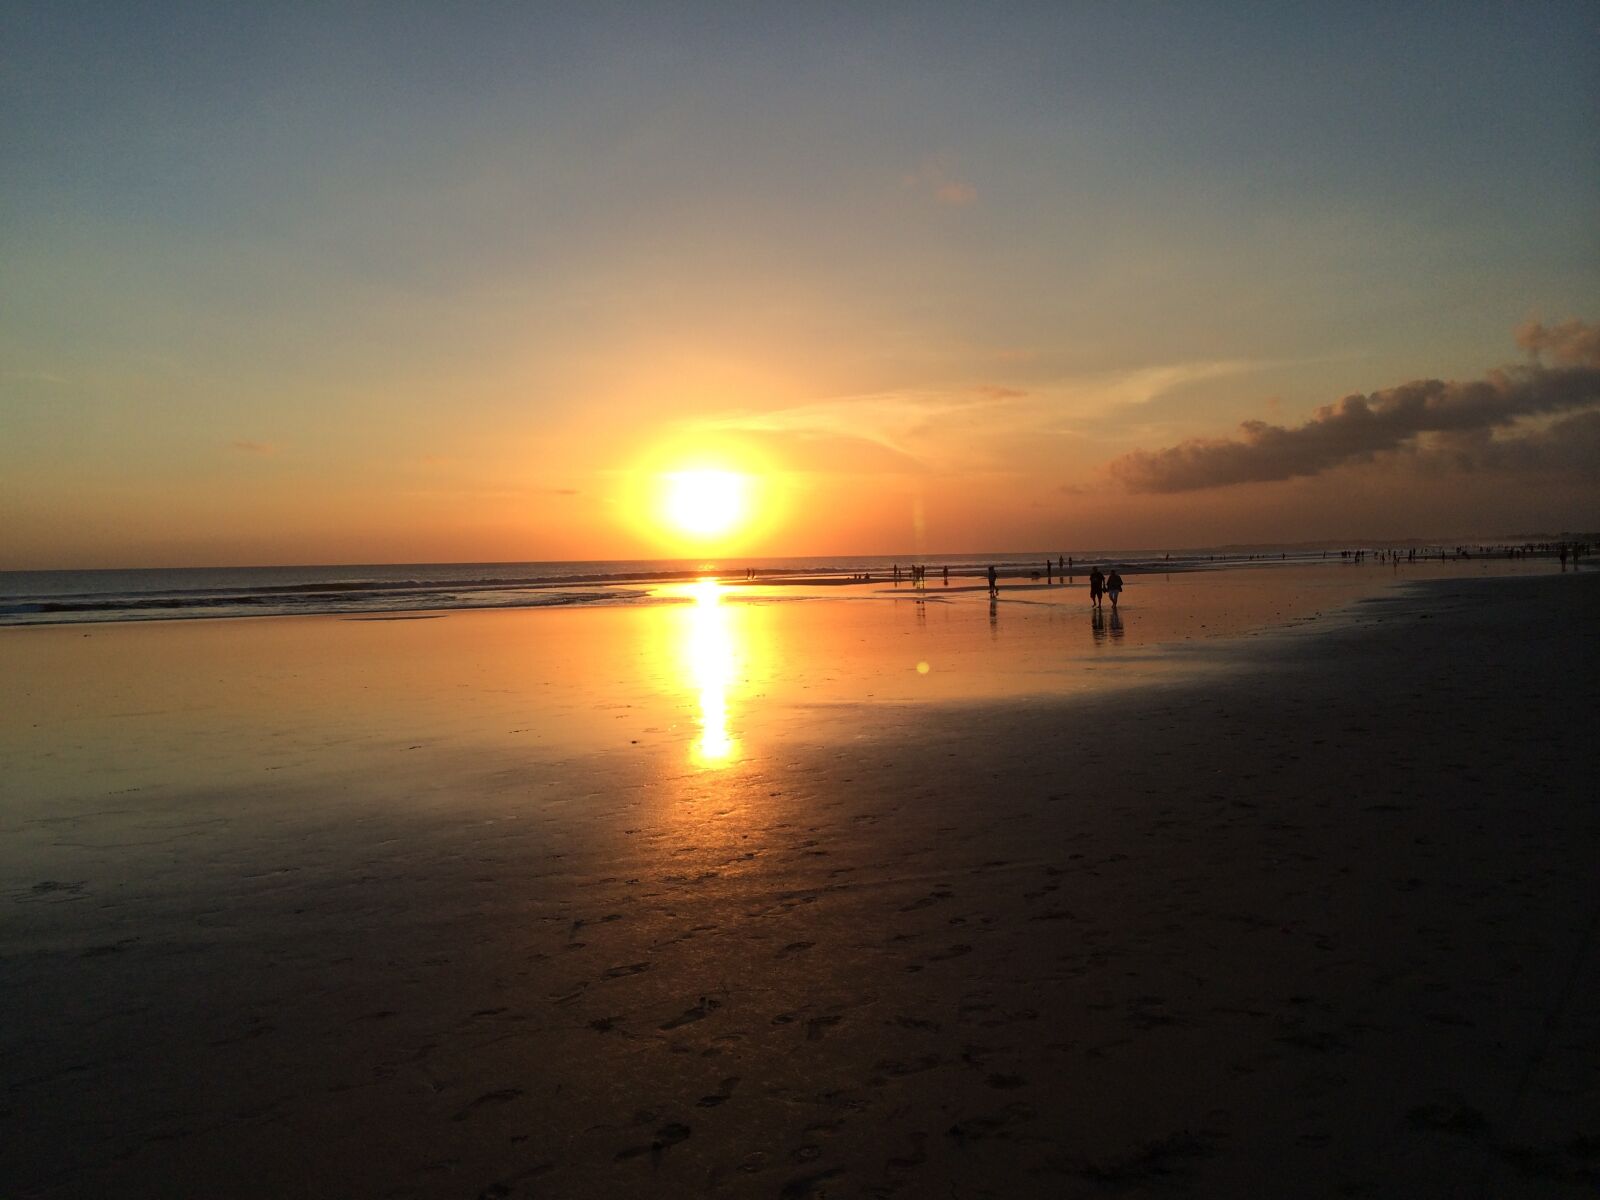 Apple iPhone 5s + iPhone 5s back camera 4.12mm f/2.2 sample photo. Bali, sunset, ocean photography